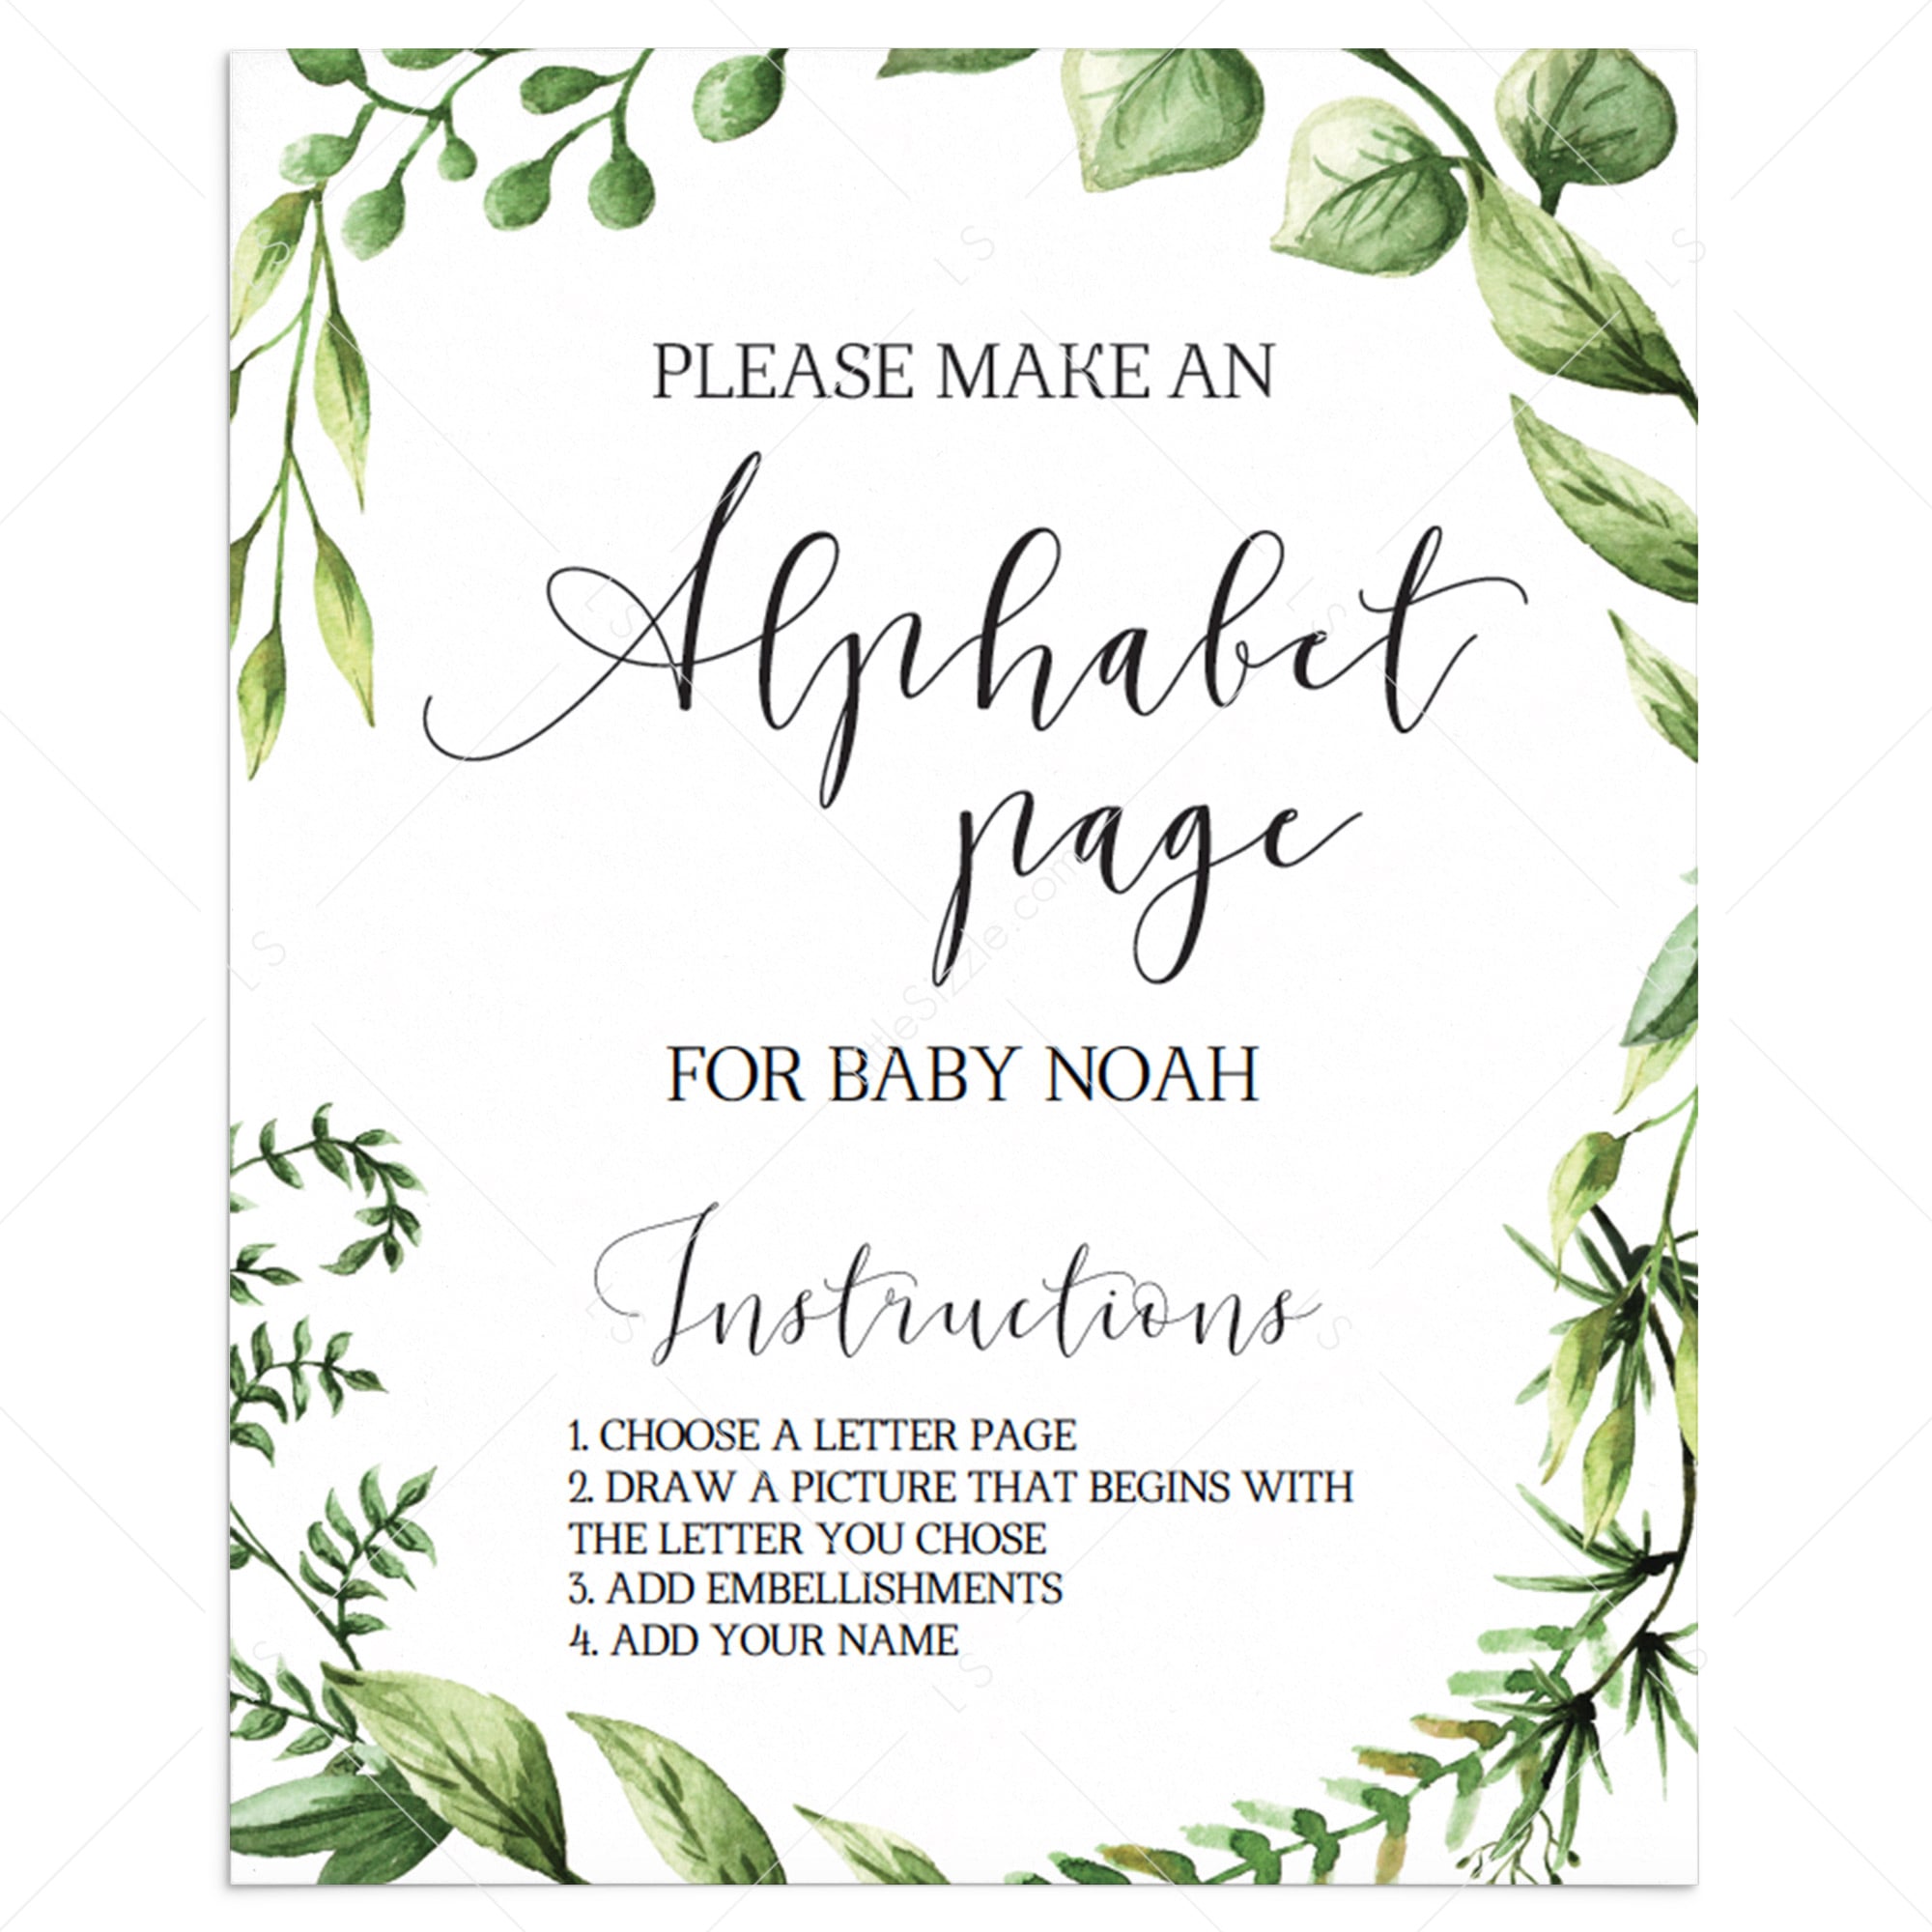 Greenery baby shower alphabet book signage printable by LittleSizzle